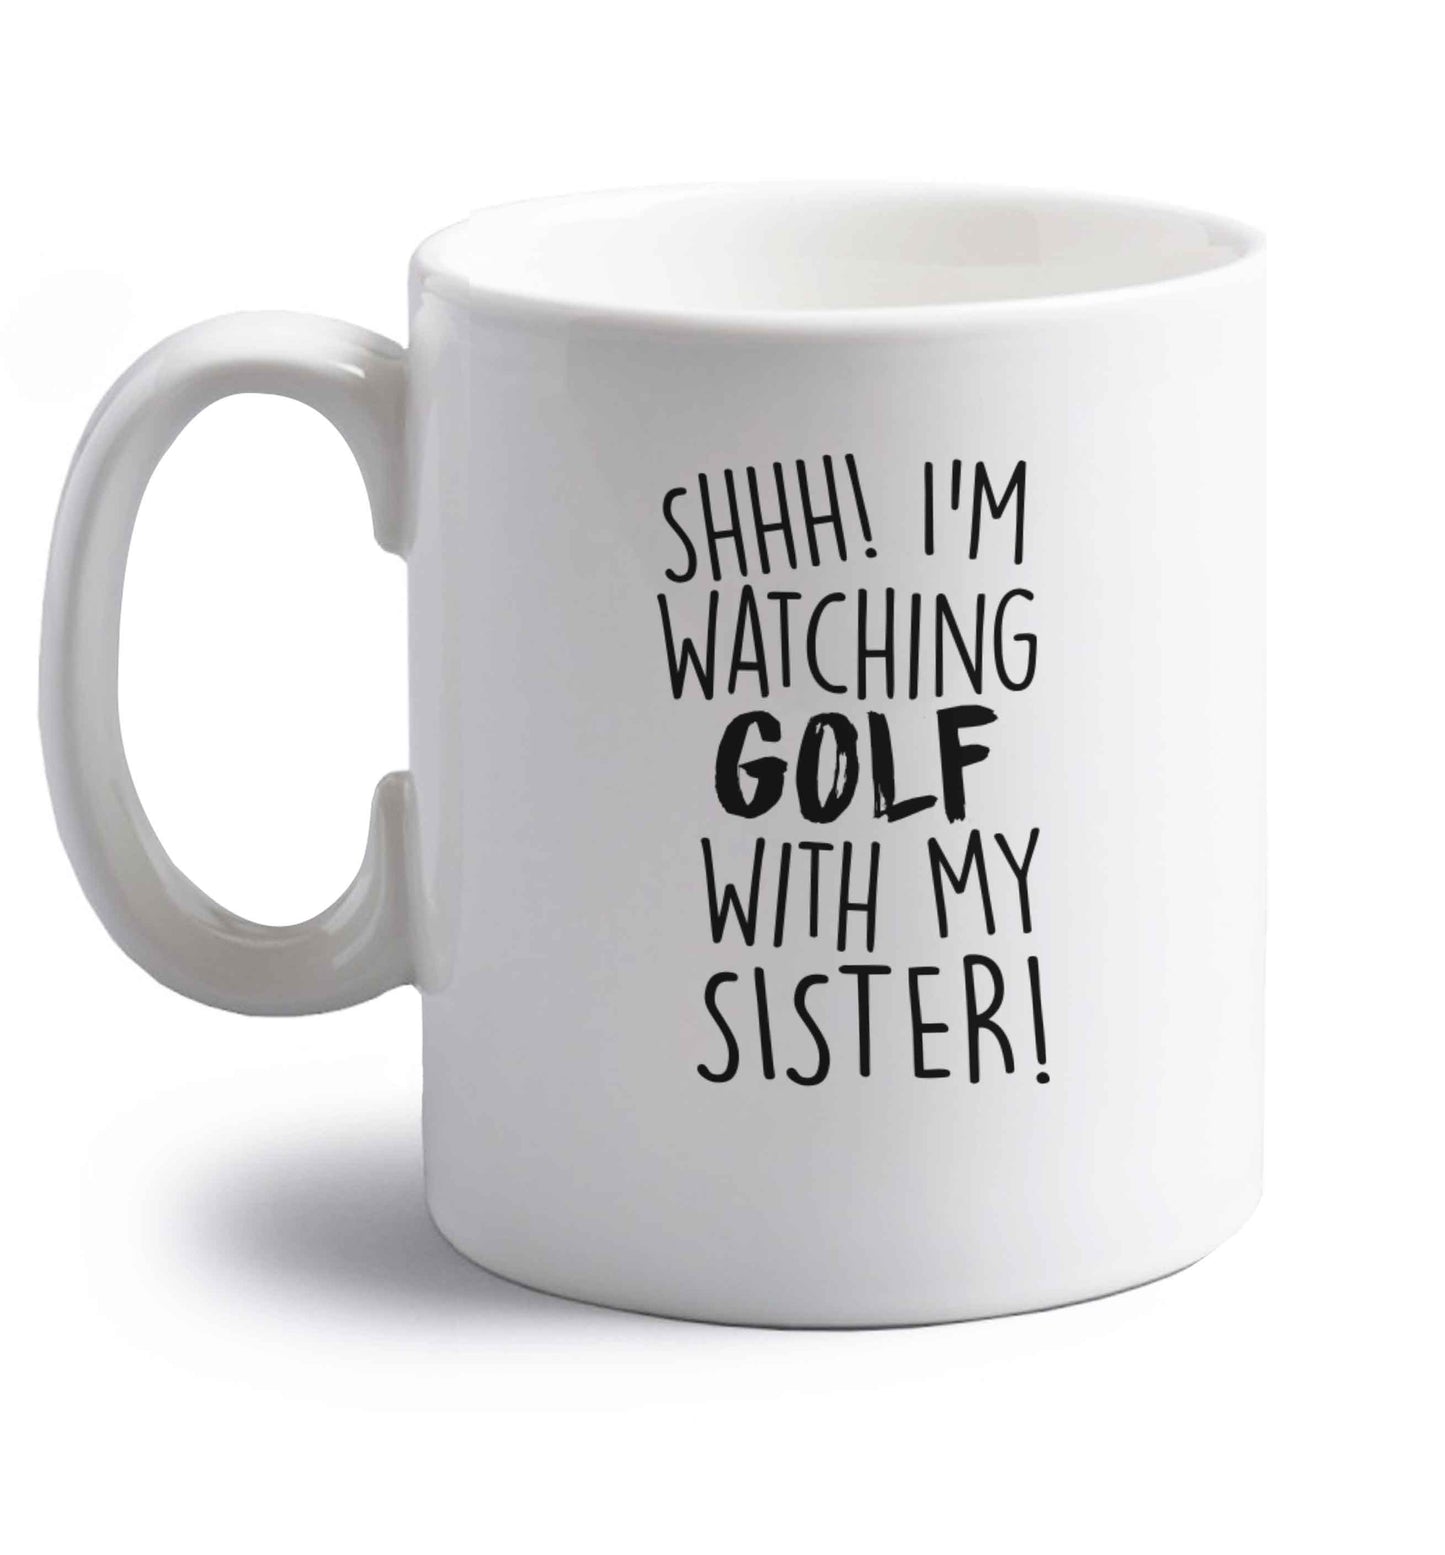 Shh I'm watching golf with my sister right handed white ceramic mug 